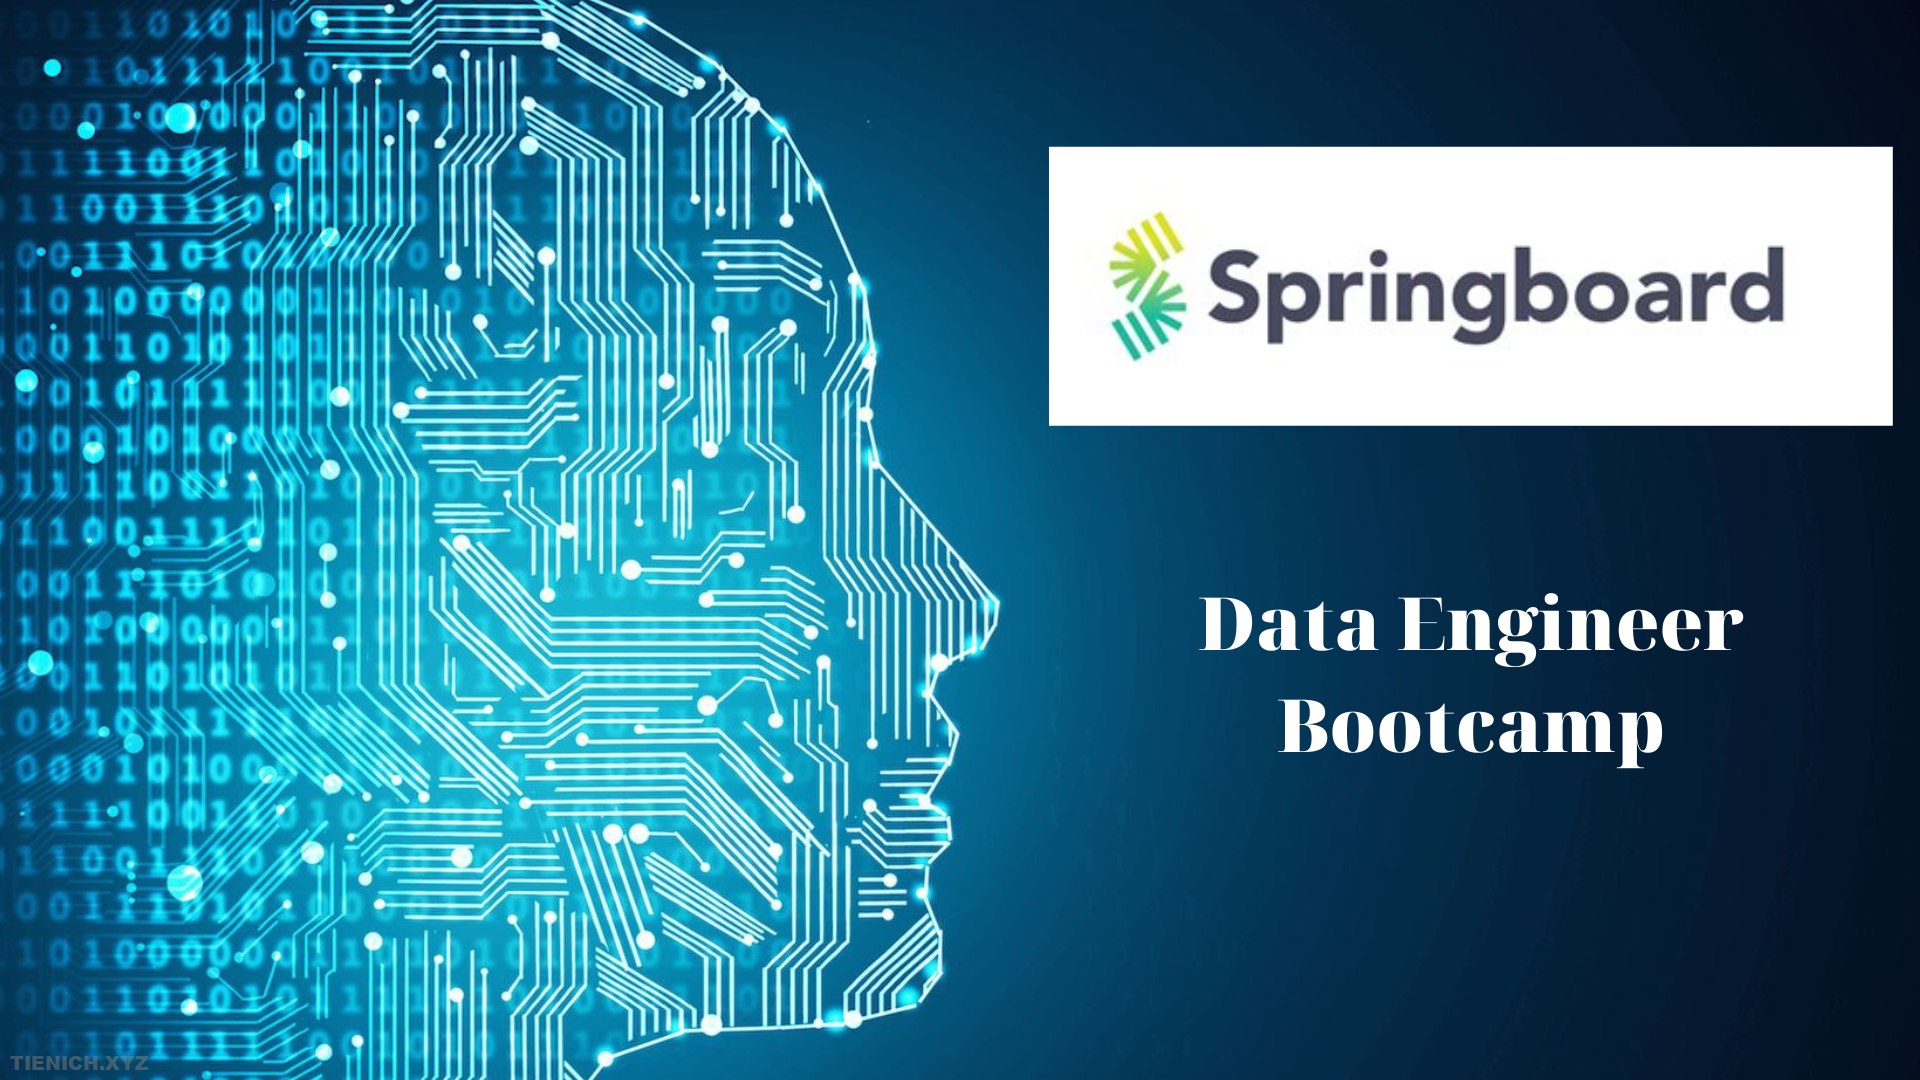 The data engineer bootcamp at Springboard